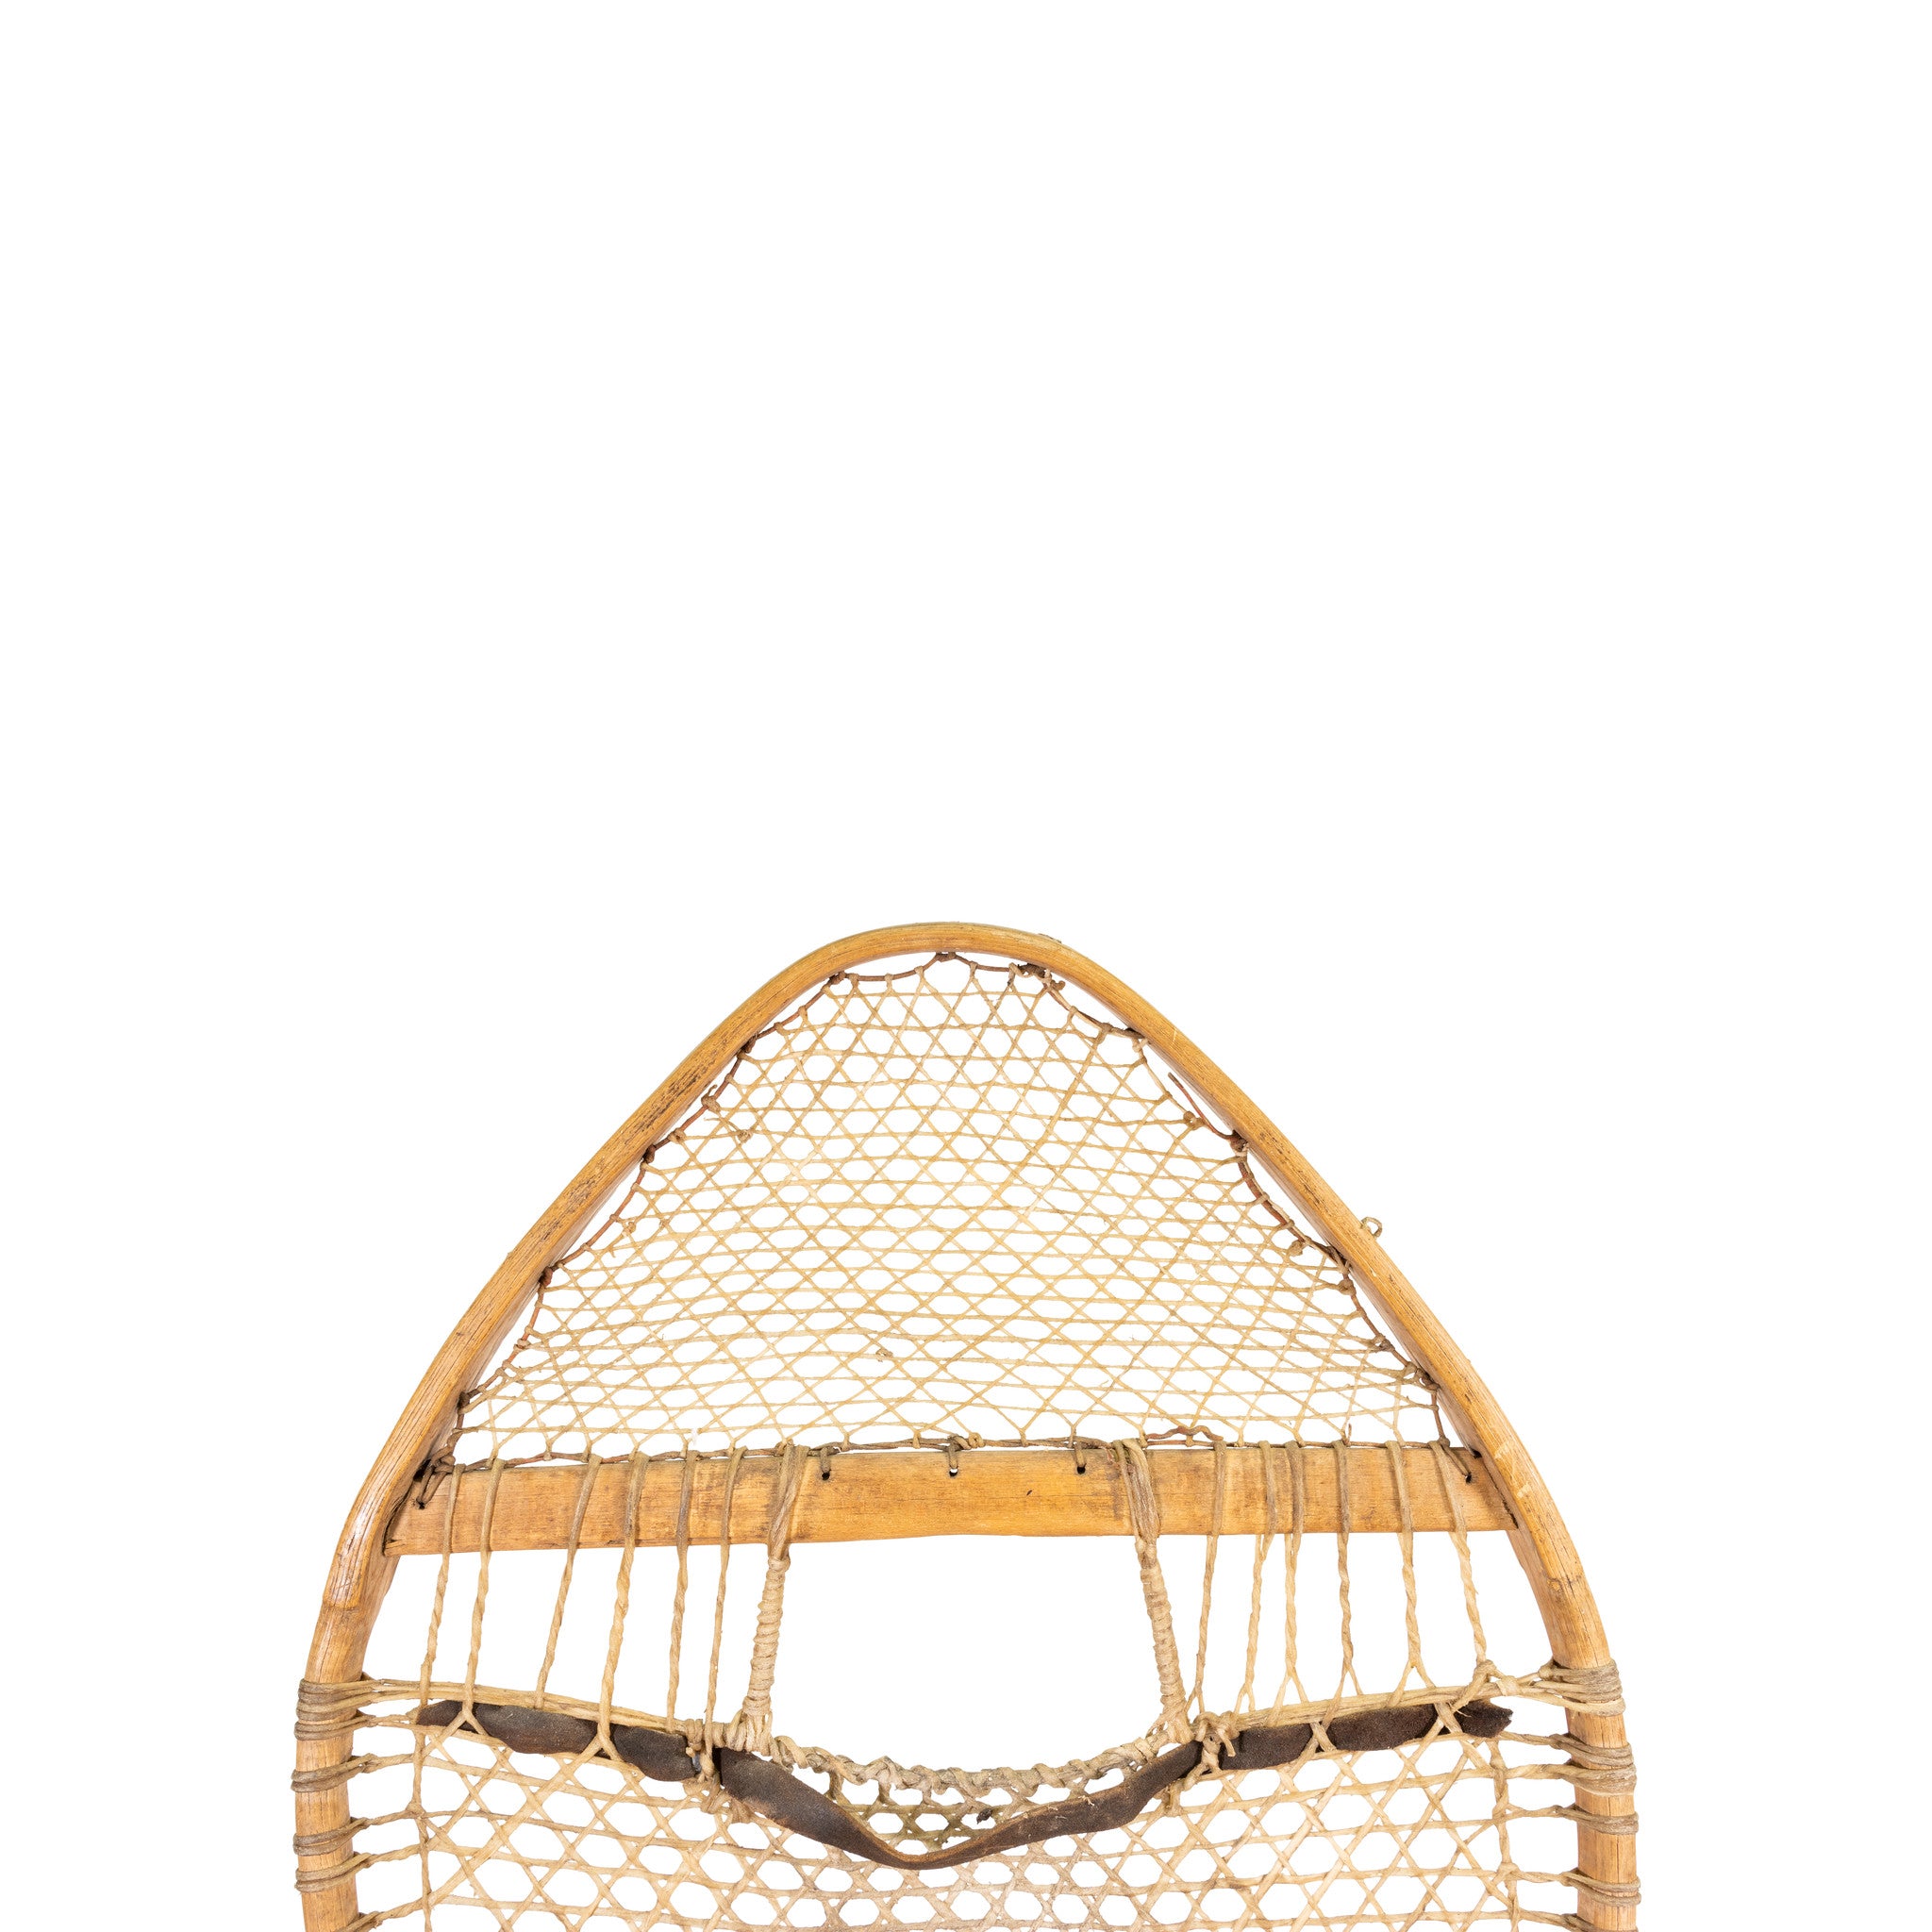 Penobscot Bear Paw Snowshoes